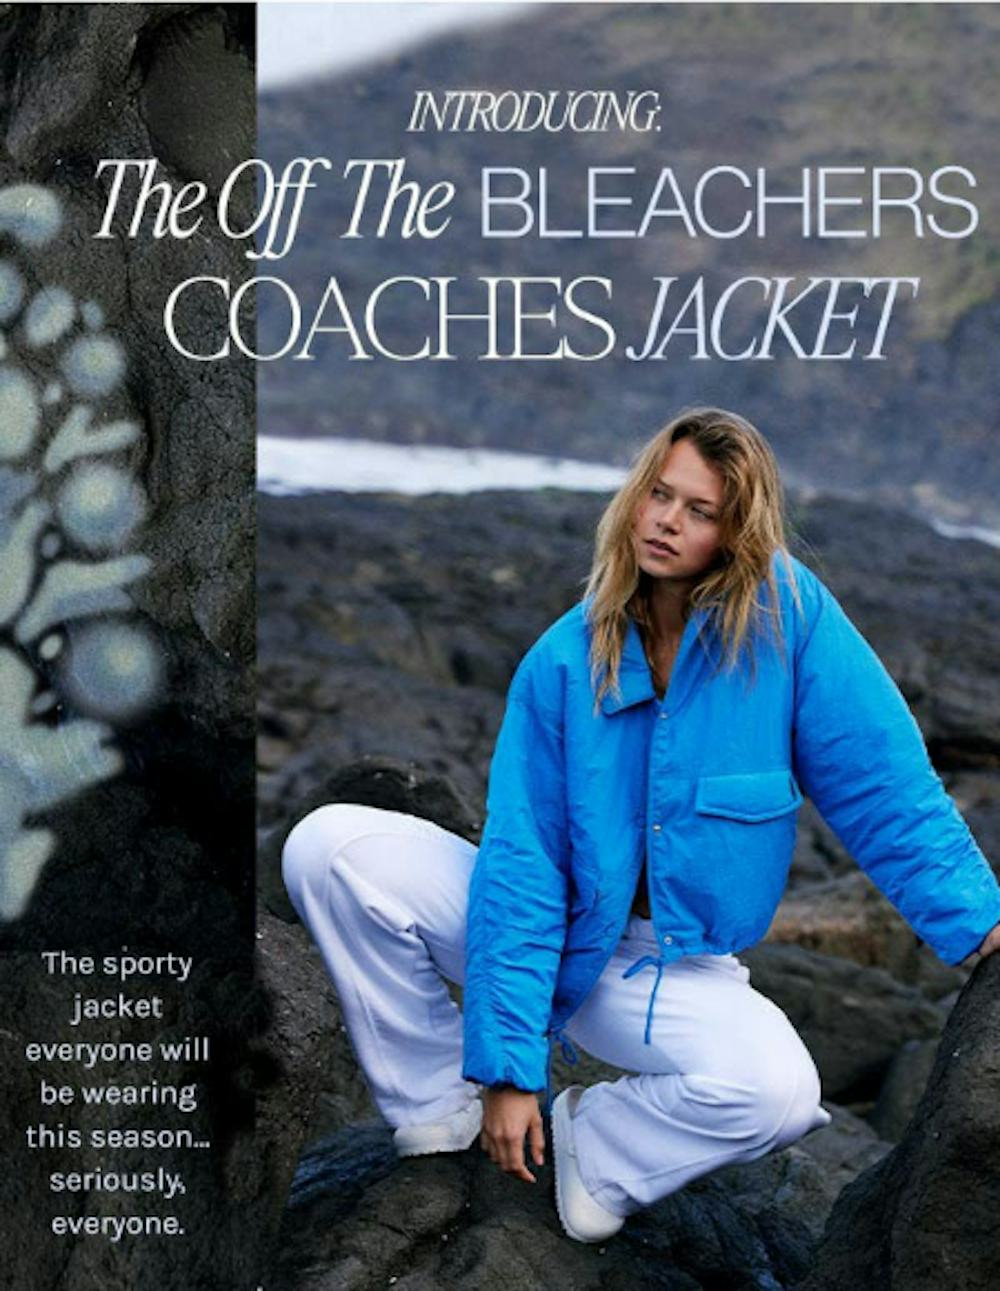 Introducing: The Off The Bleachers Coaches Jacket